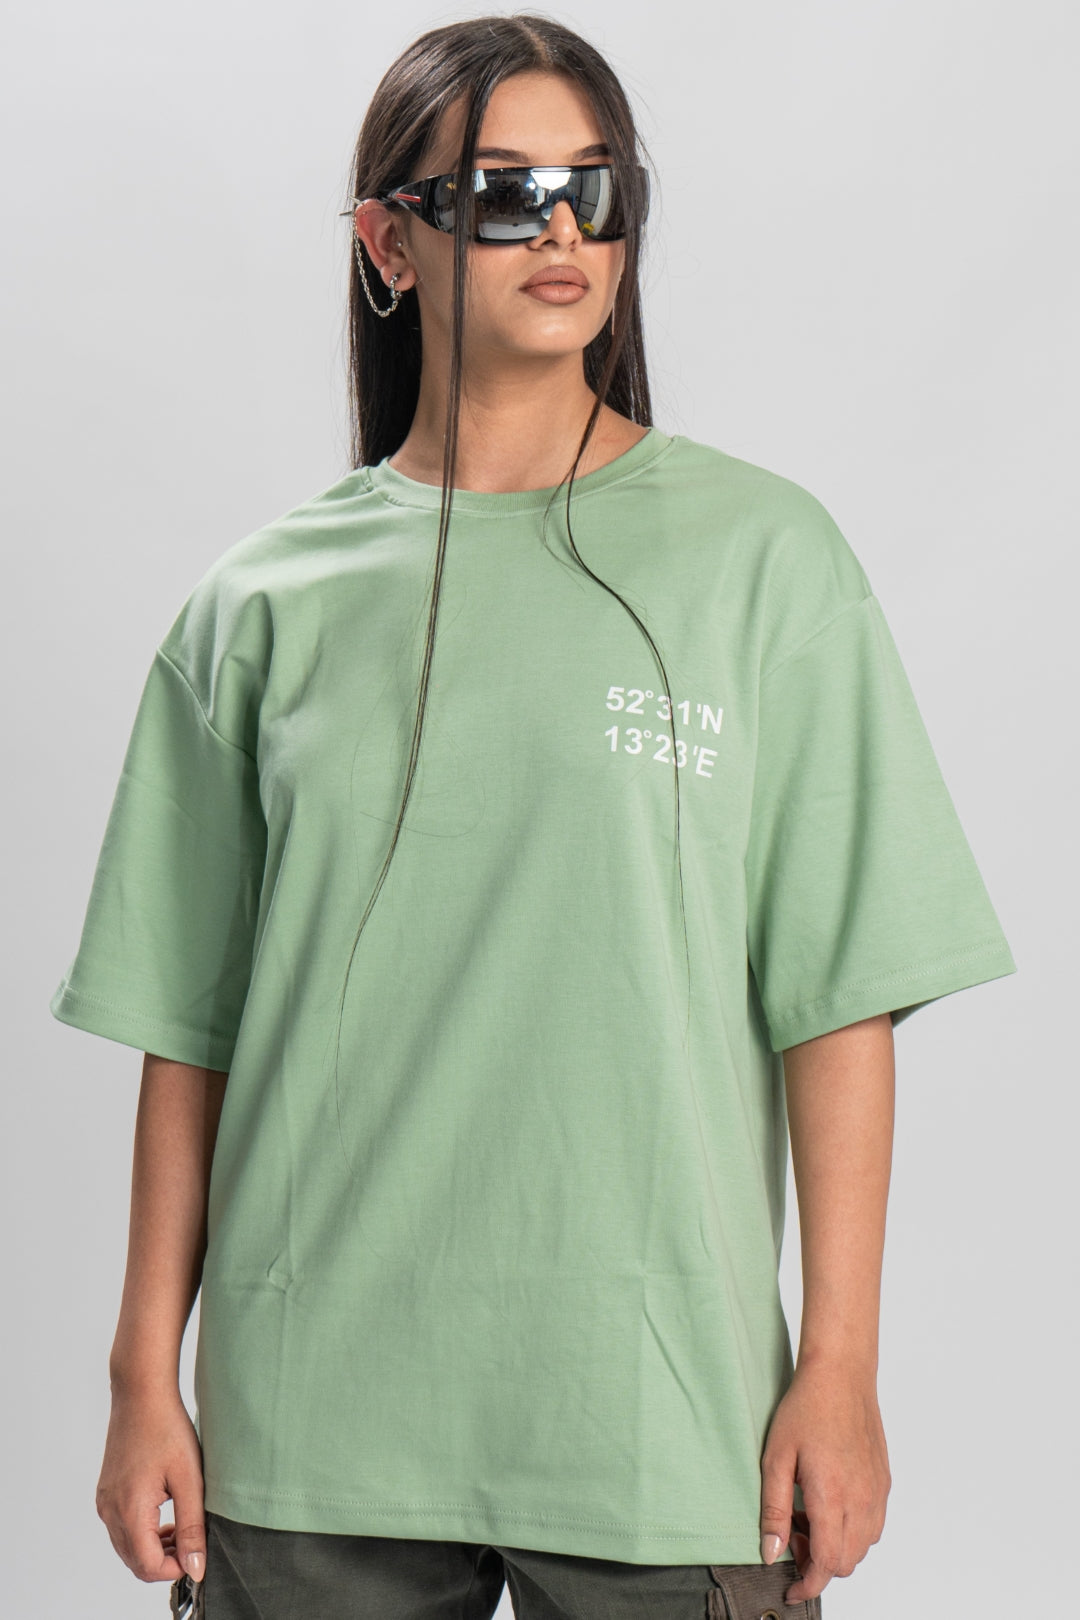 Research Oversized T-shirt